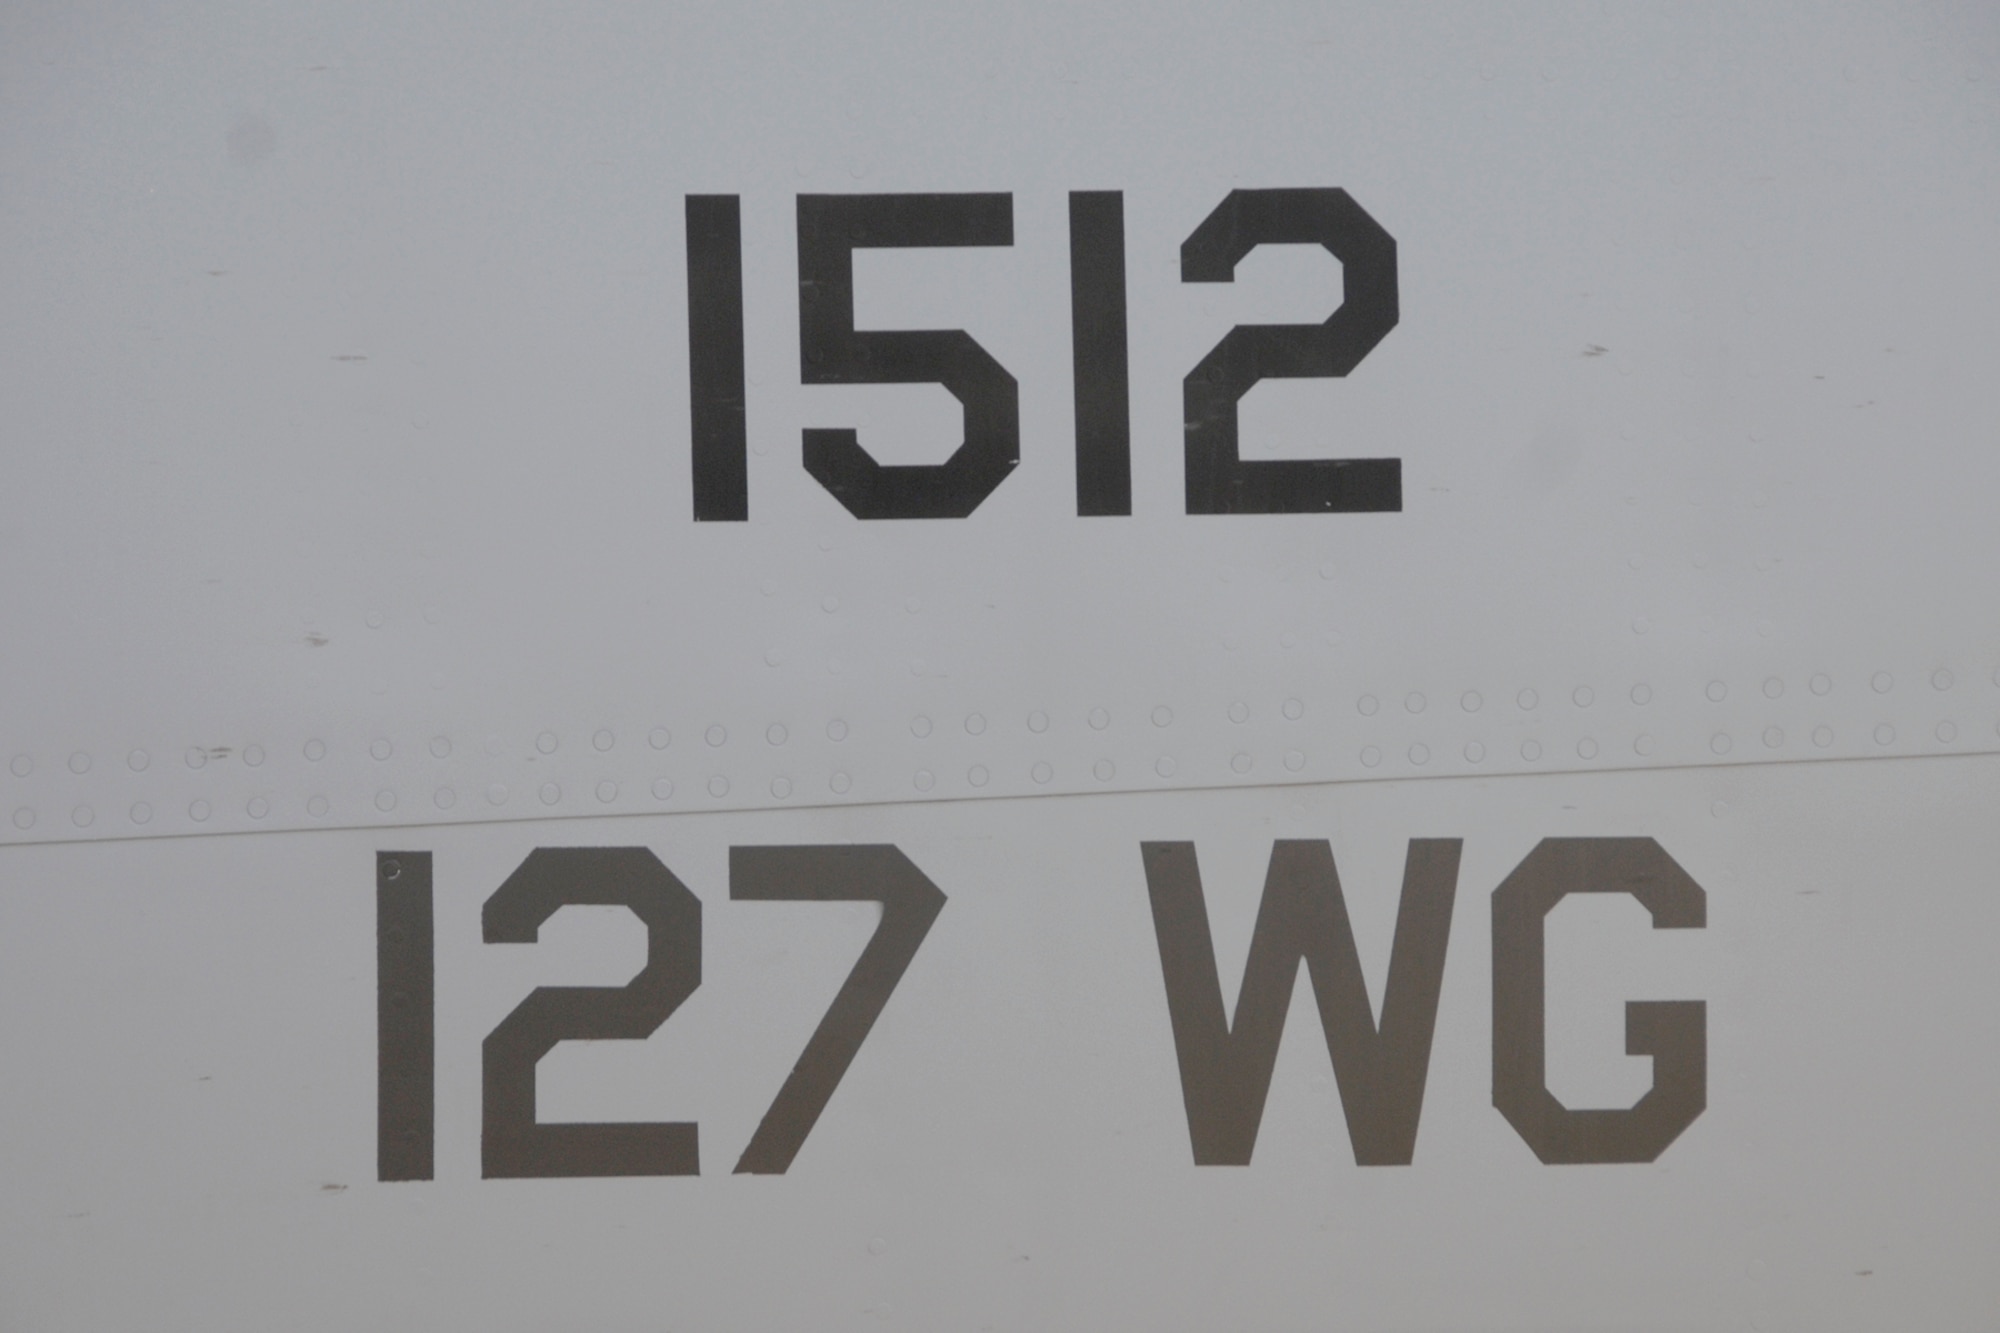 Every number and insignia on an U.S. Air Force aircraft or a uniform has a meaning. These numbers on a KC-135 Stratotanker at Selfridge Air National Guard Base identify the tail number of the aircraft and the aircraft’s local wing, in this case, the 127th Wing. (Air National Guard photo by Brittani Baisden)